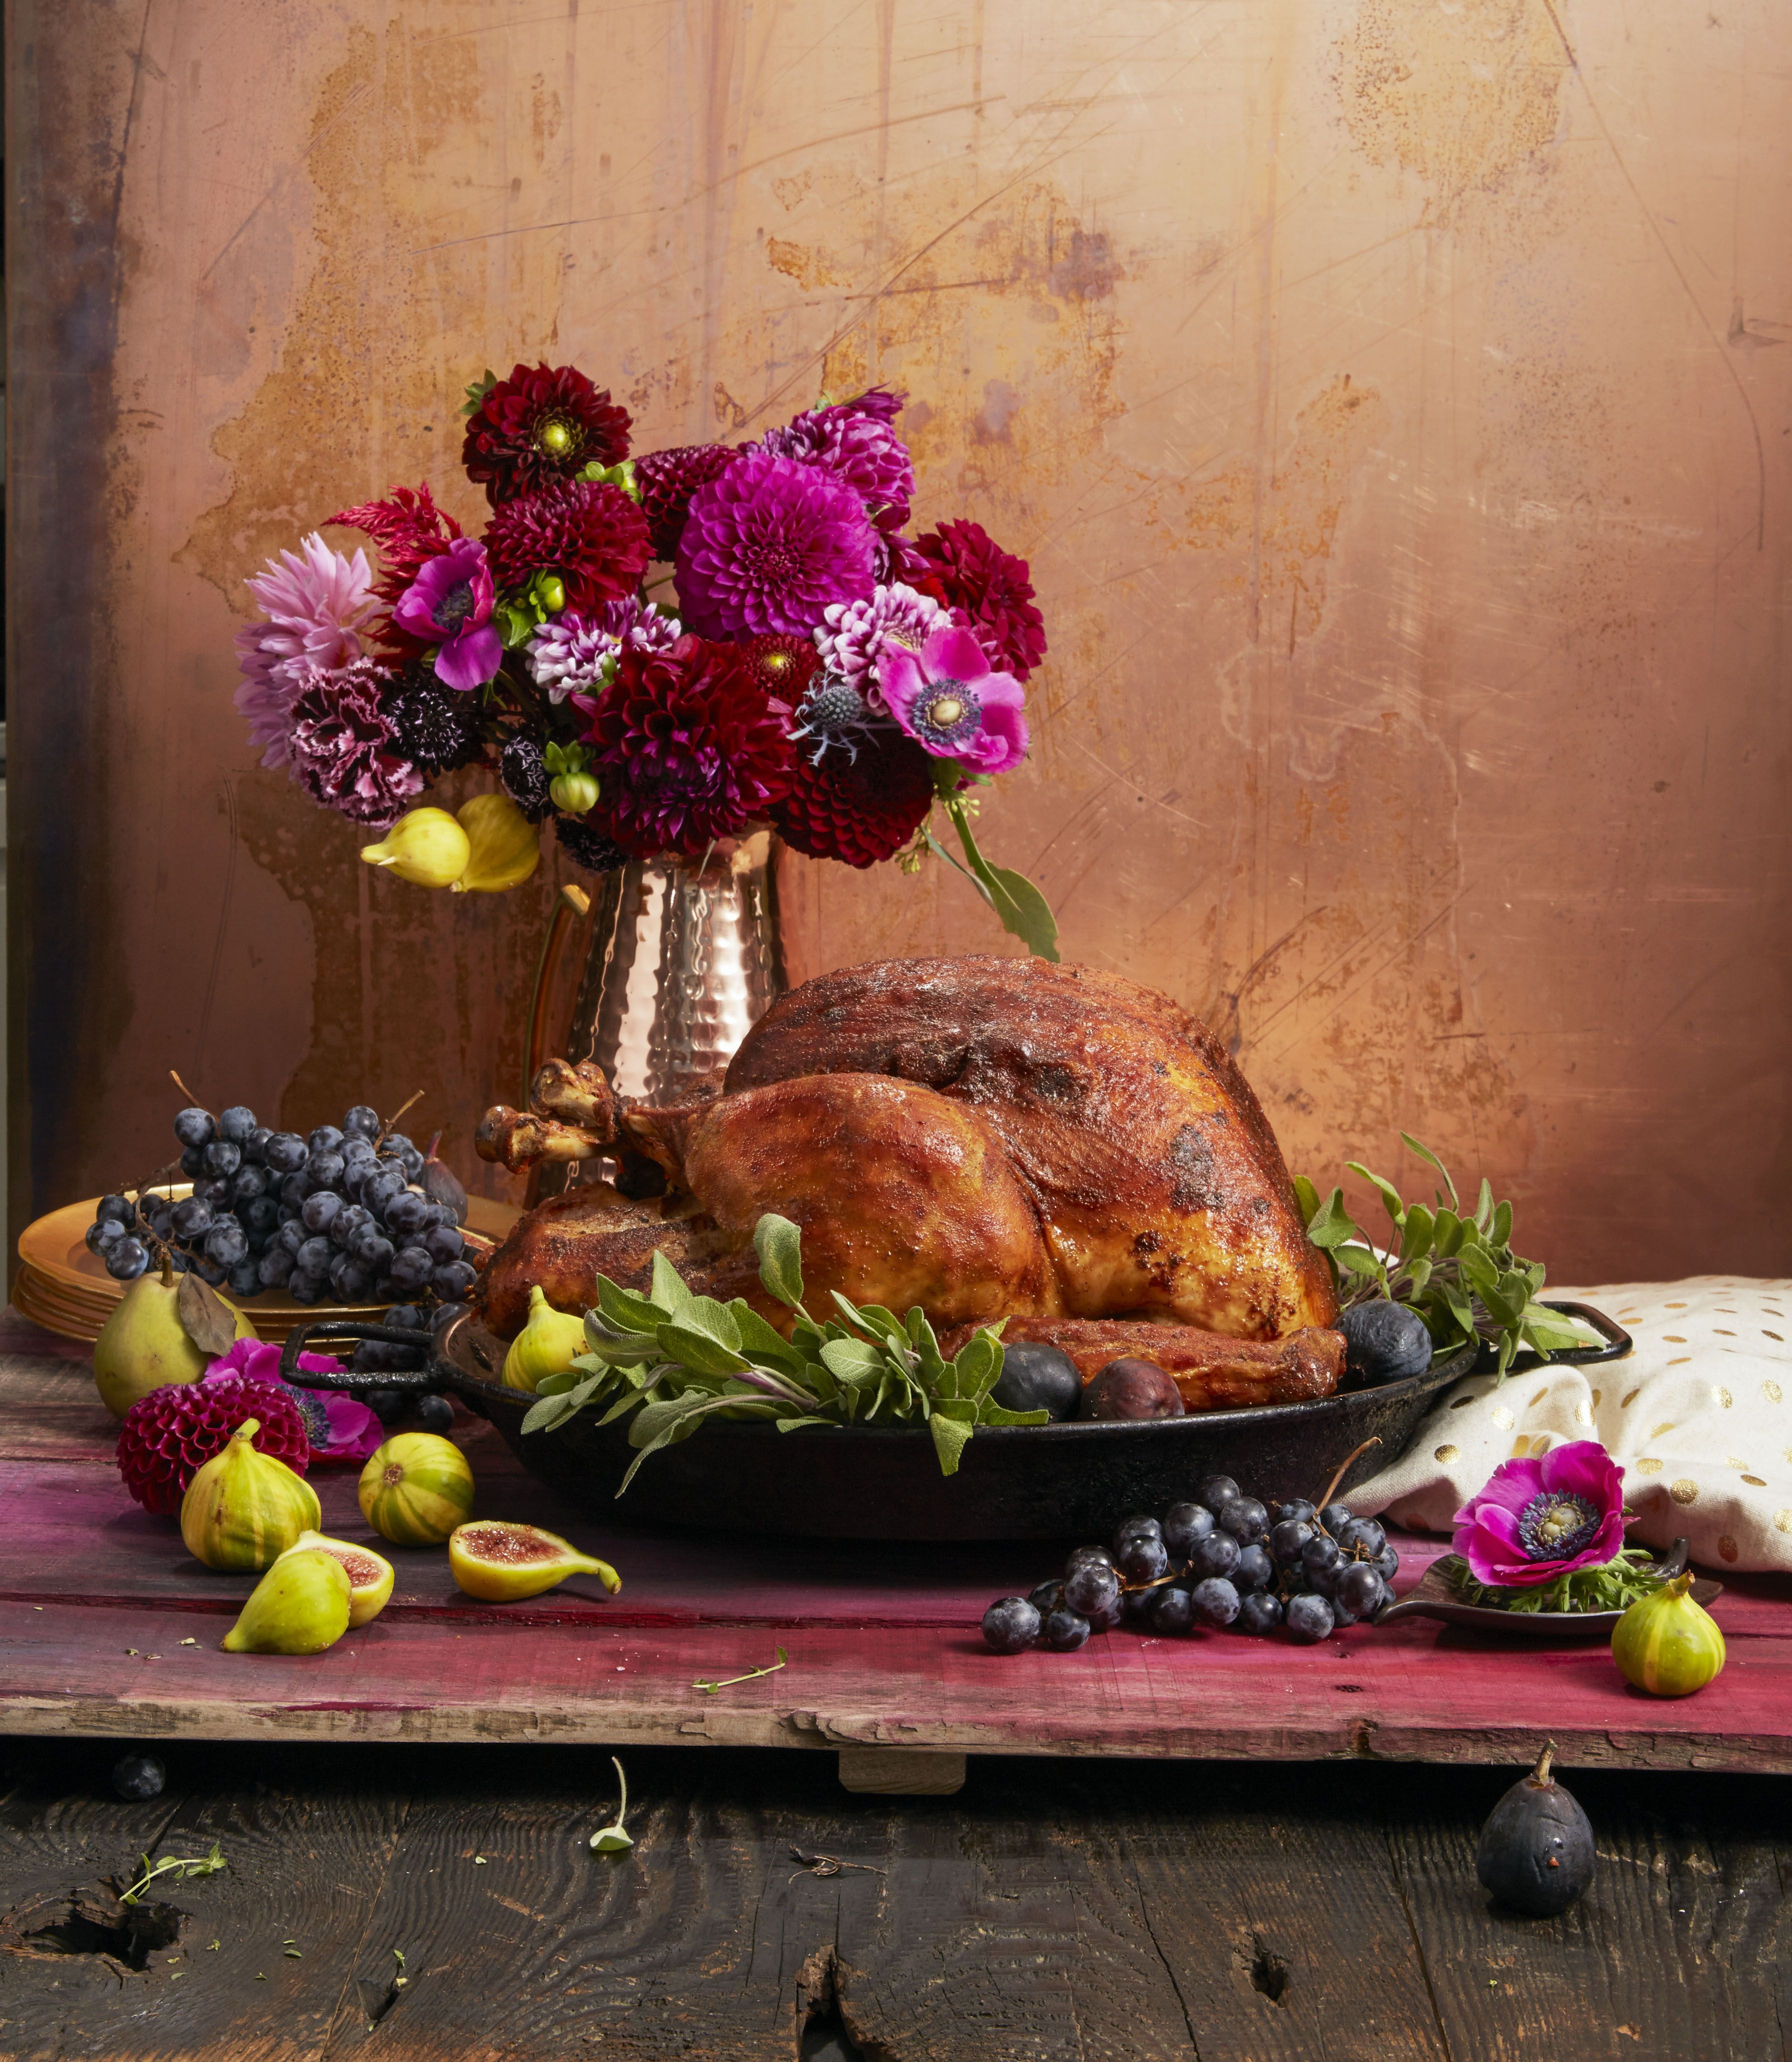 https://hips.hearstapps.com/hmg-prod/images/how-long-to-cook-a-turkey-1599590144.jpg